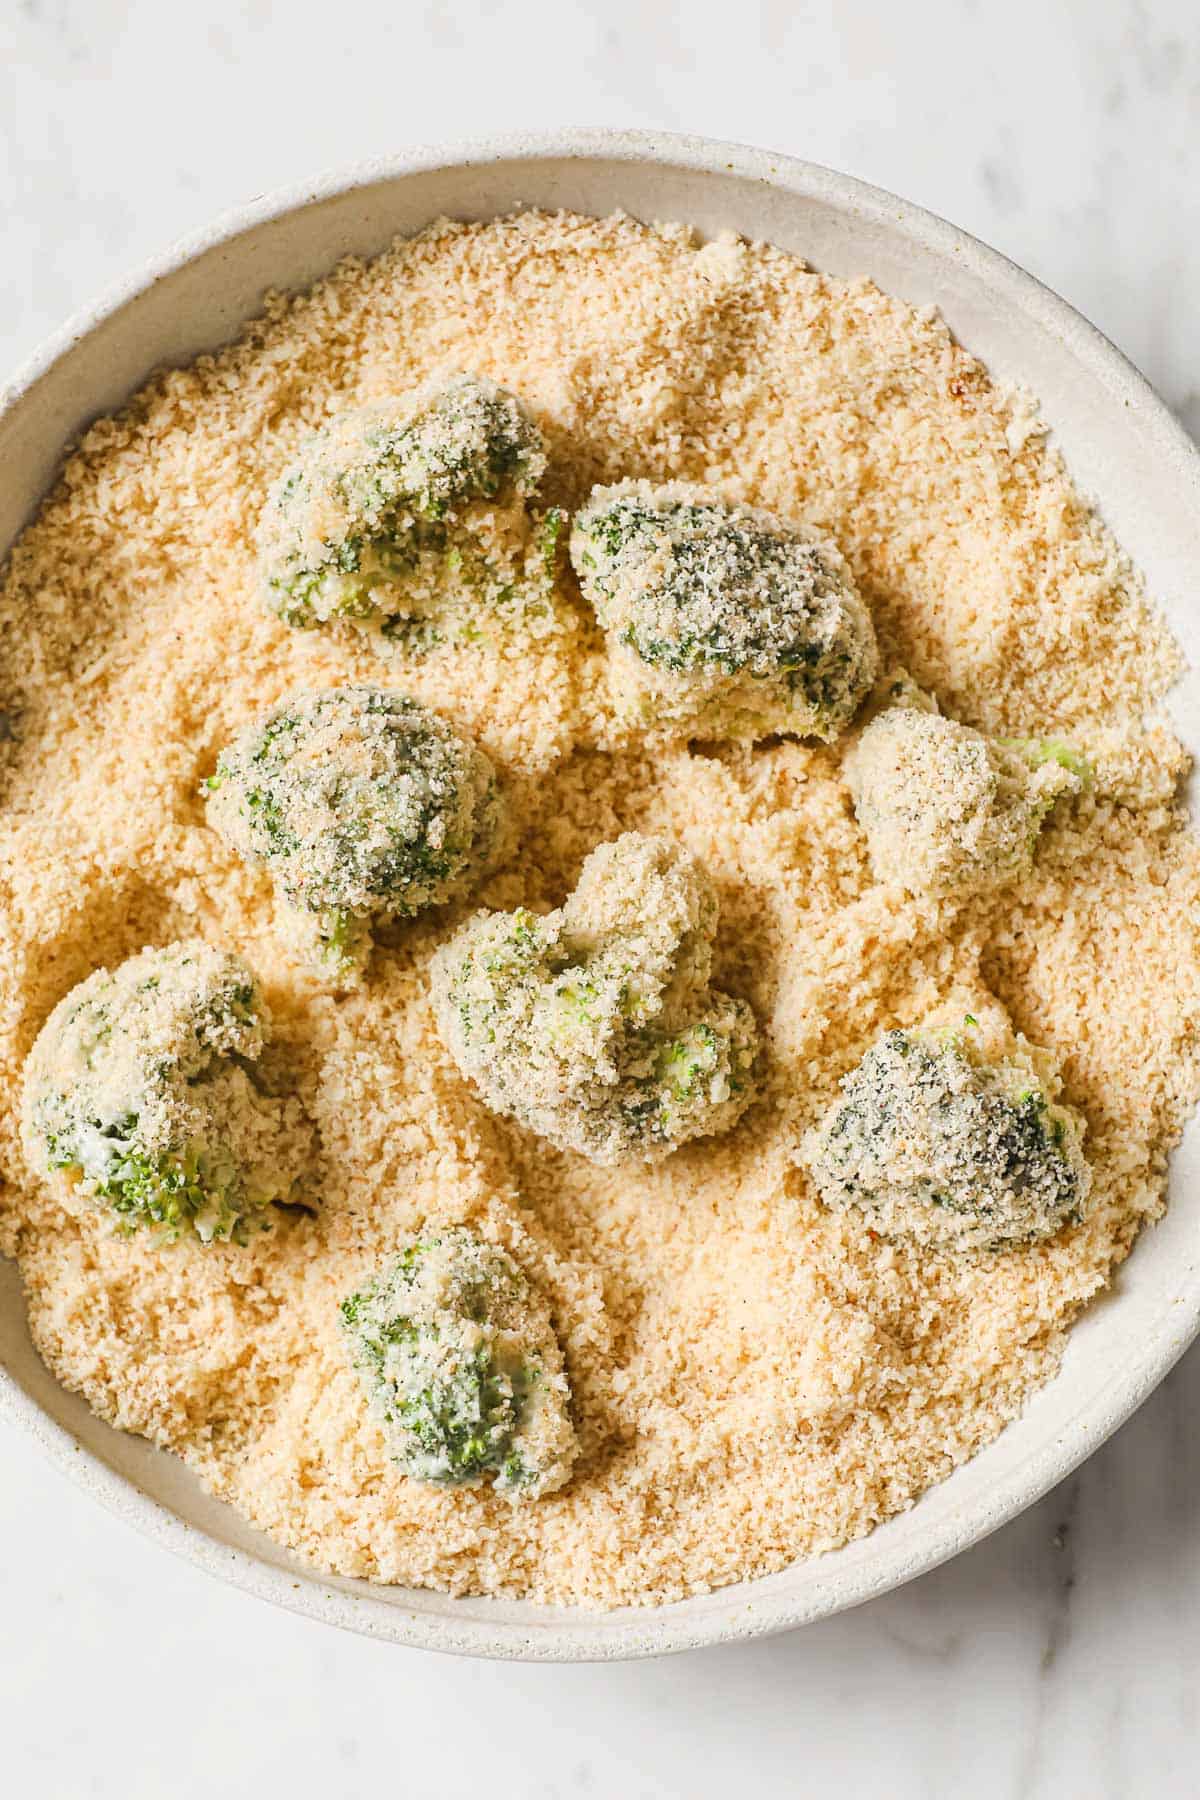 a bowl with almond flour and broccoli florets that have been coated in mayo.